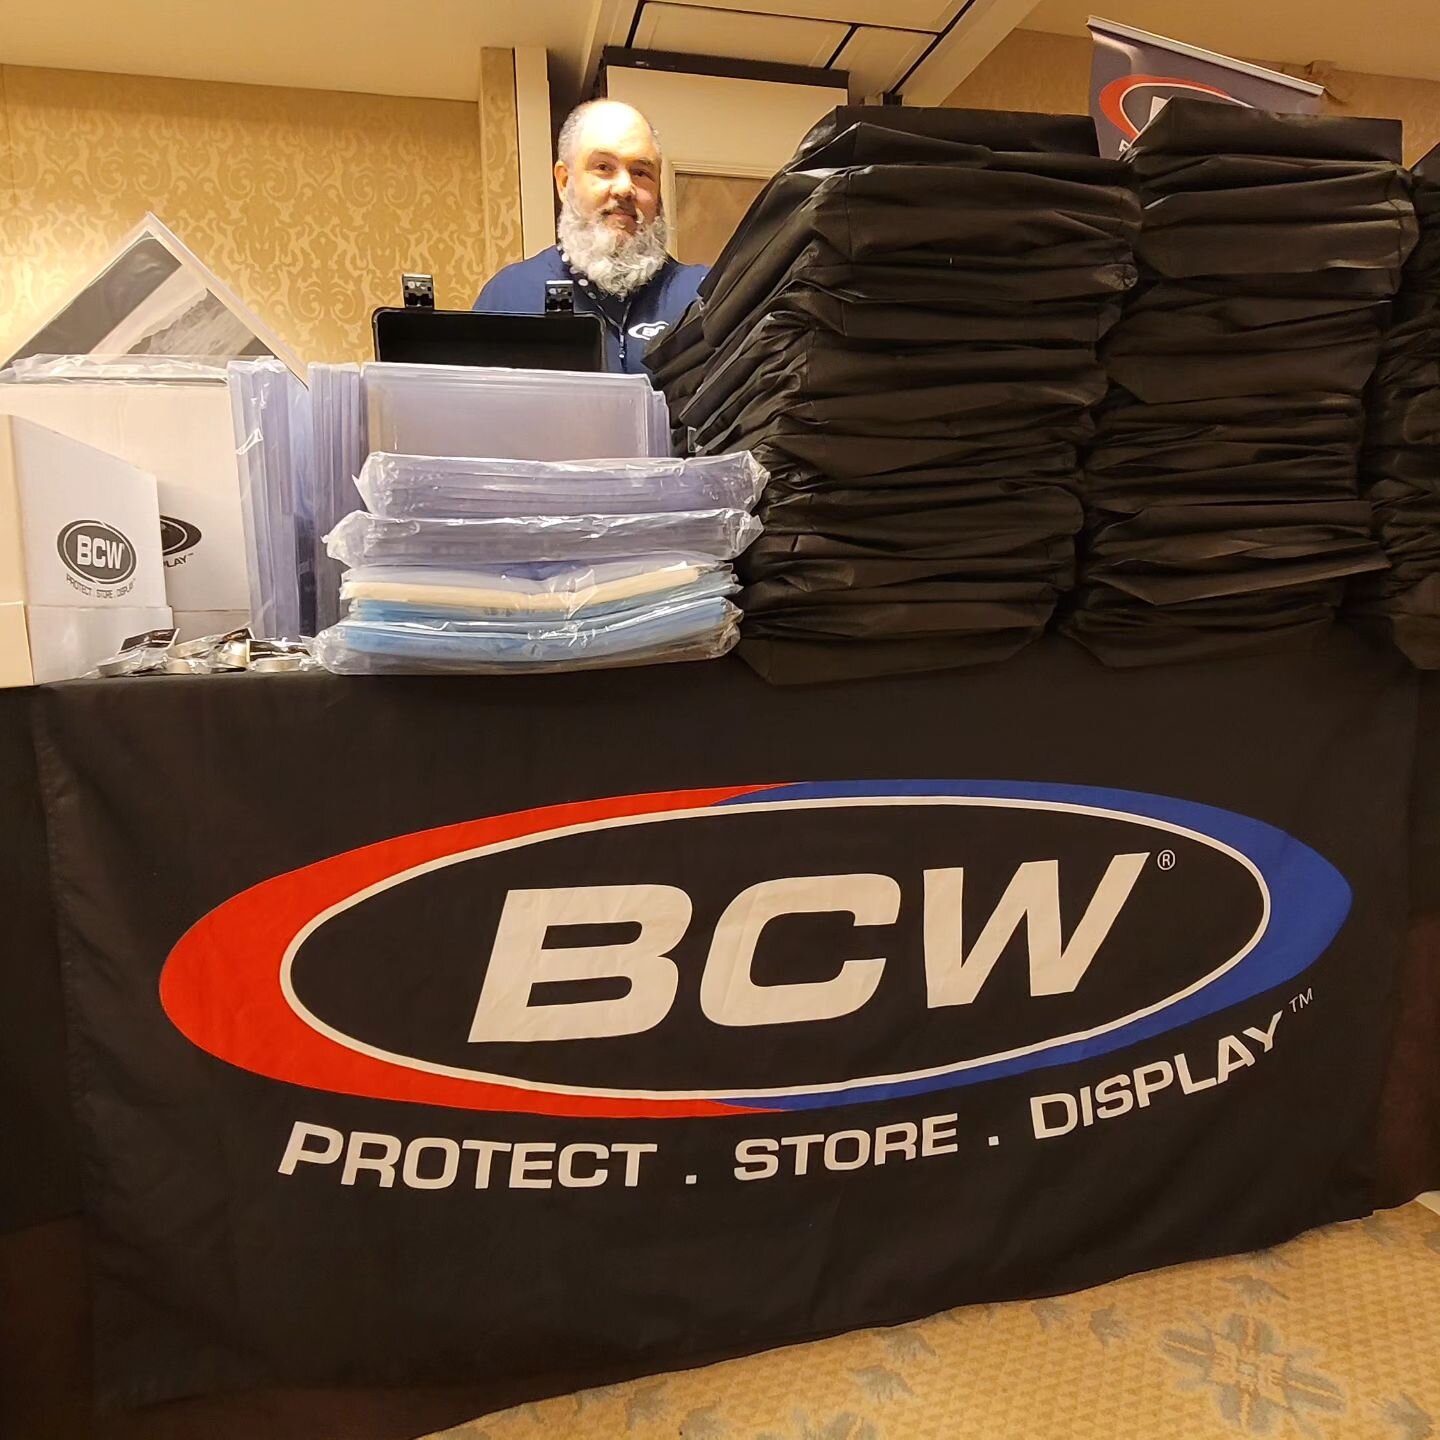 We 🧡 @bcwrecordsupplies ! 

This is Jeremy from @bcw_supplies - who we've only met about 3 times in person, but he might be one of our favorite people ever!! They've been an absolute dream to work with, and we appreciate everything they do for us as